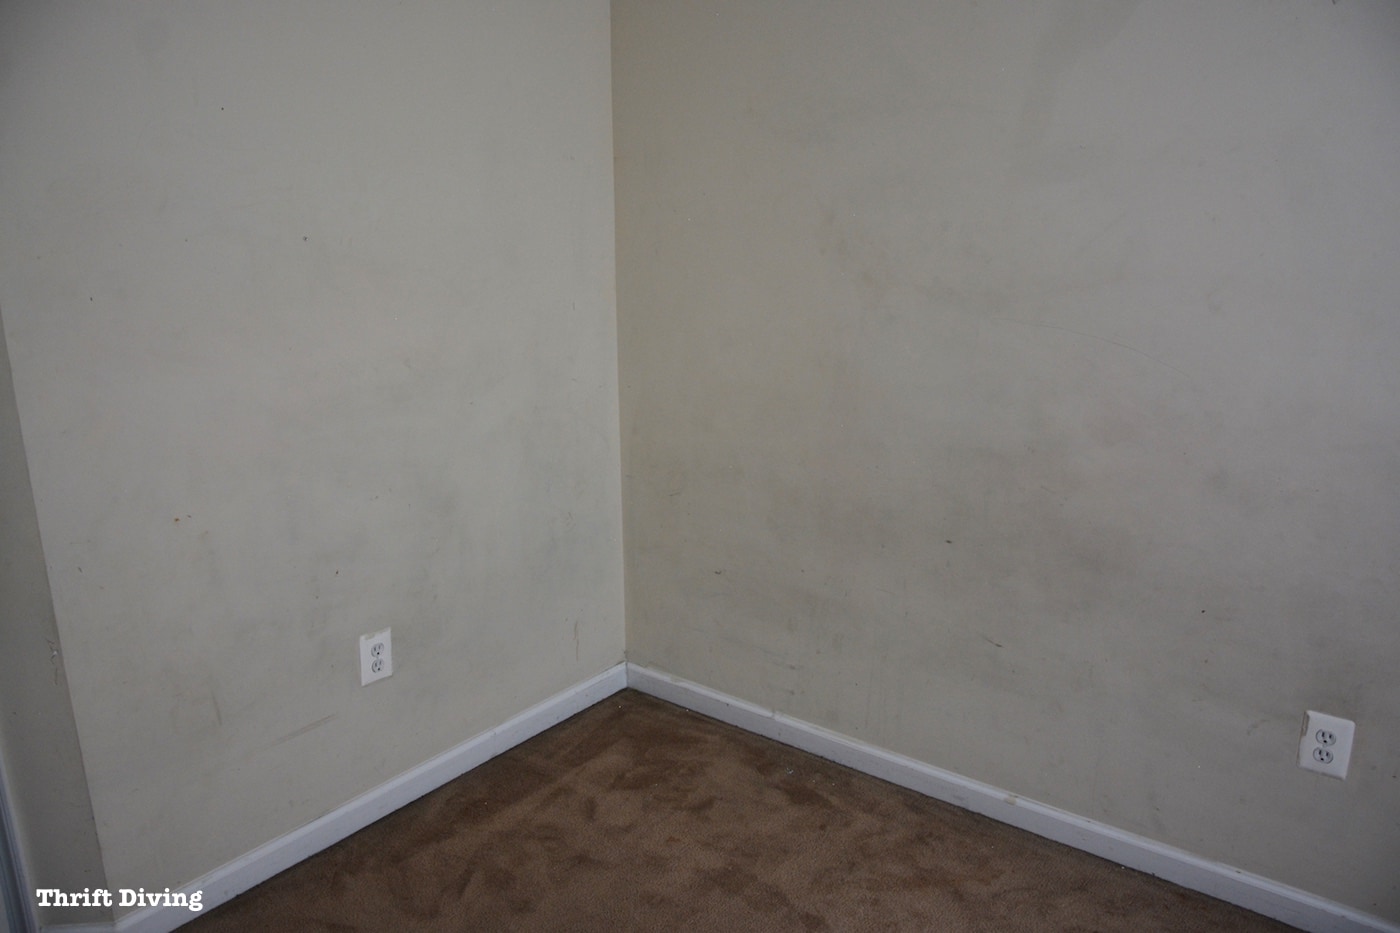 Should You DIY or Hire Professionals? Dirty walls in bedroom. - Thrift Diving